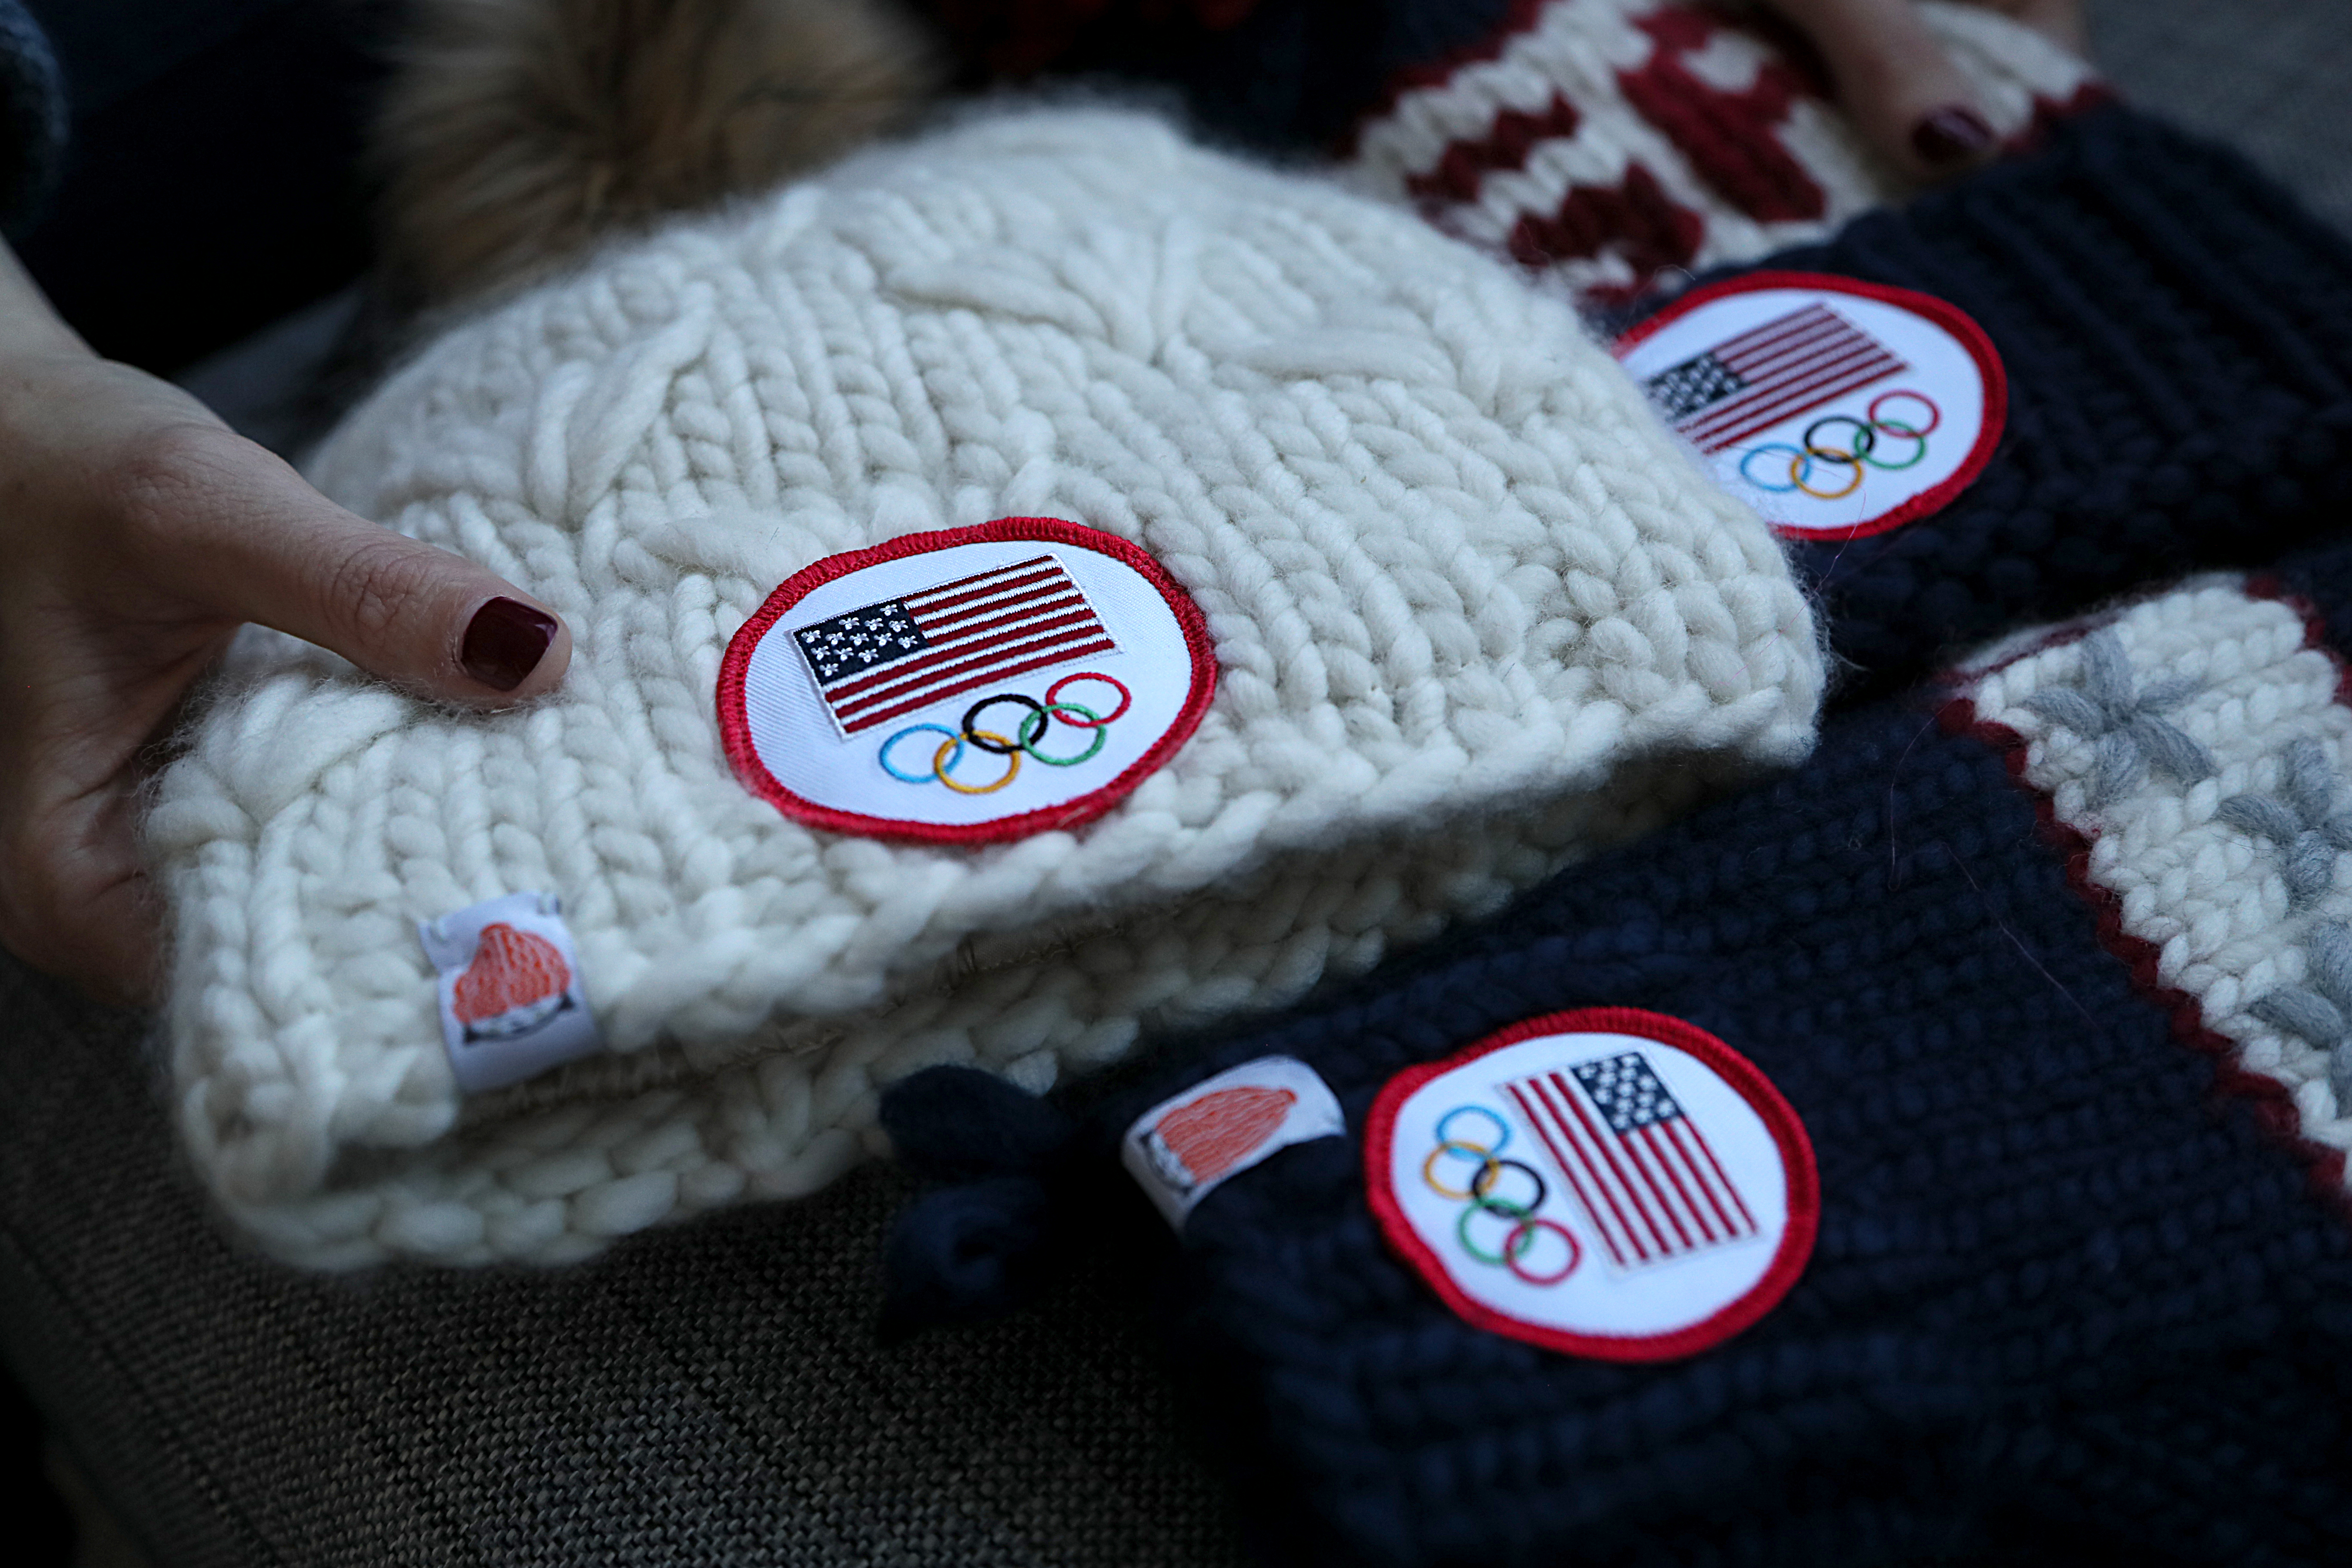 The collection includes red, white, and blue beanies displaying the letters “USA,” along with matching “TEAM” mittens — all with the official Team USA mark sewn in.